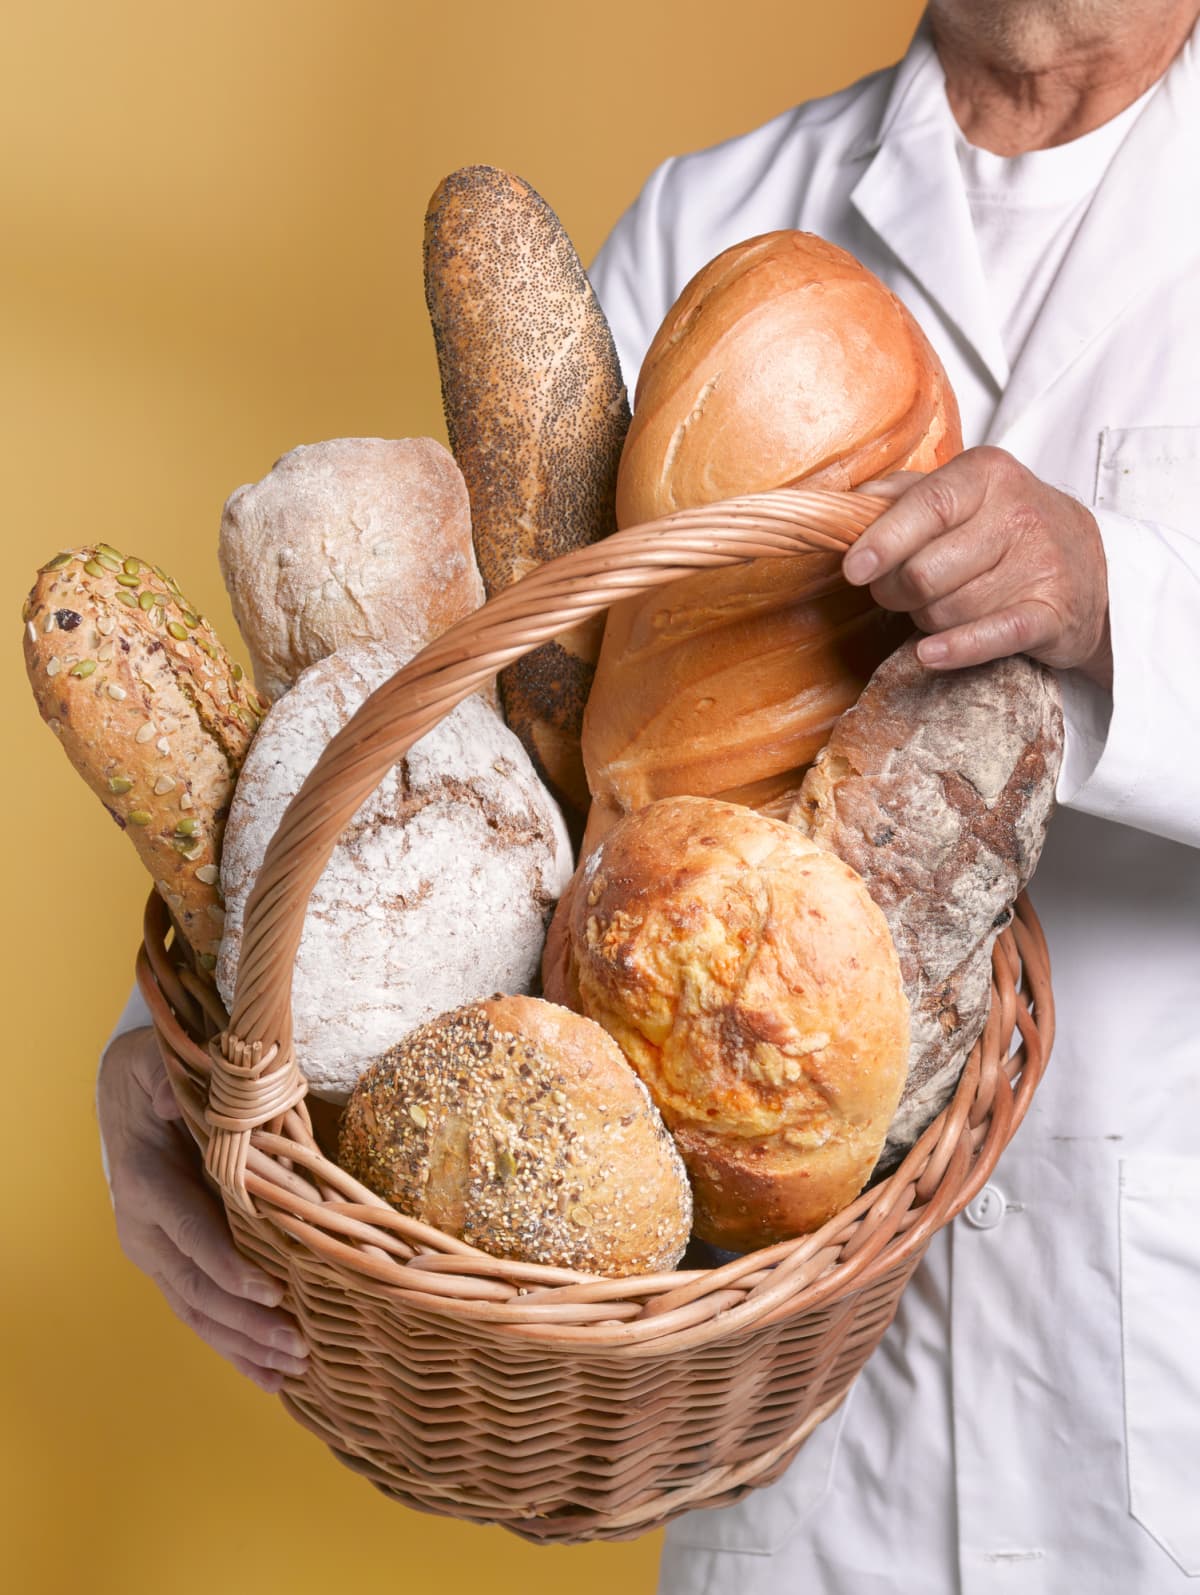 Baker holding a basket of bread loaves